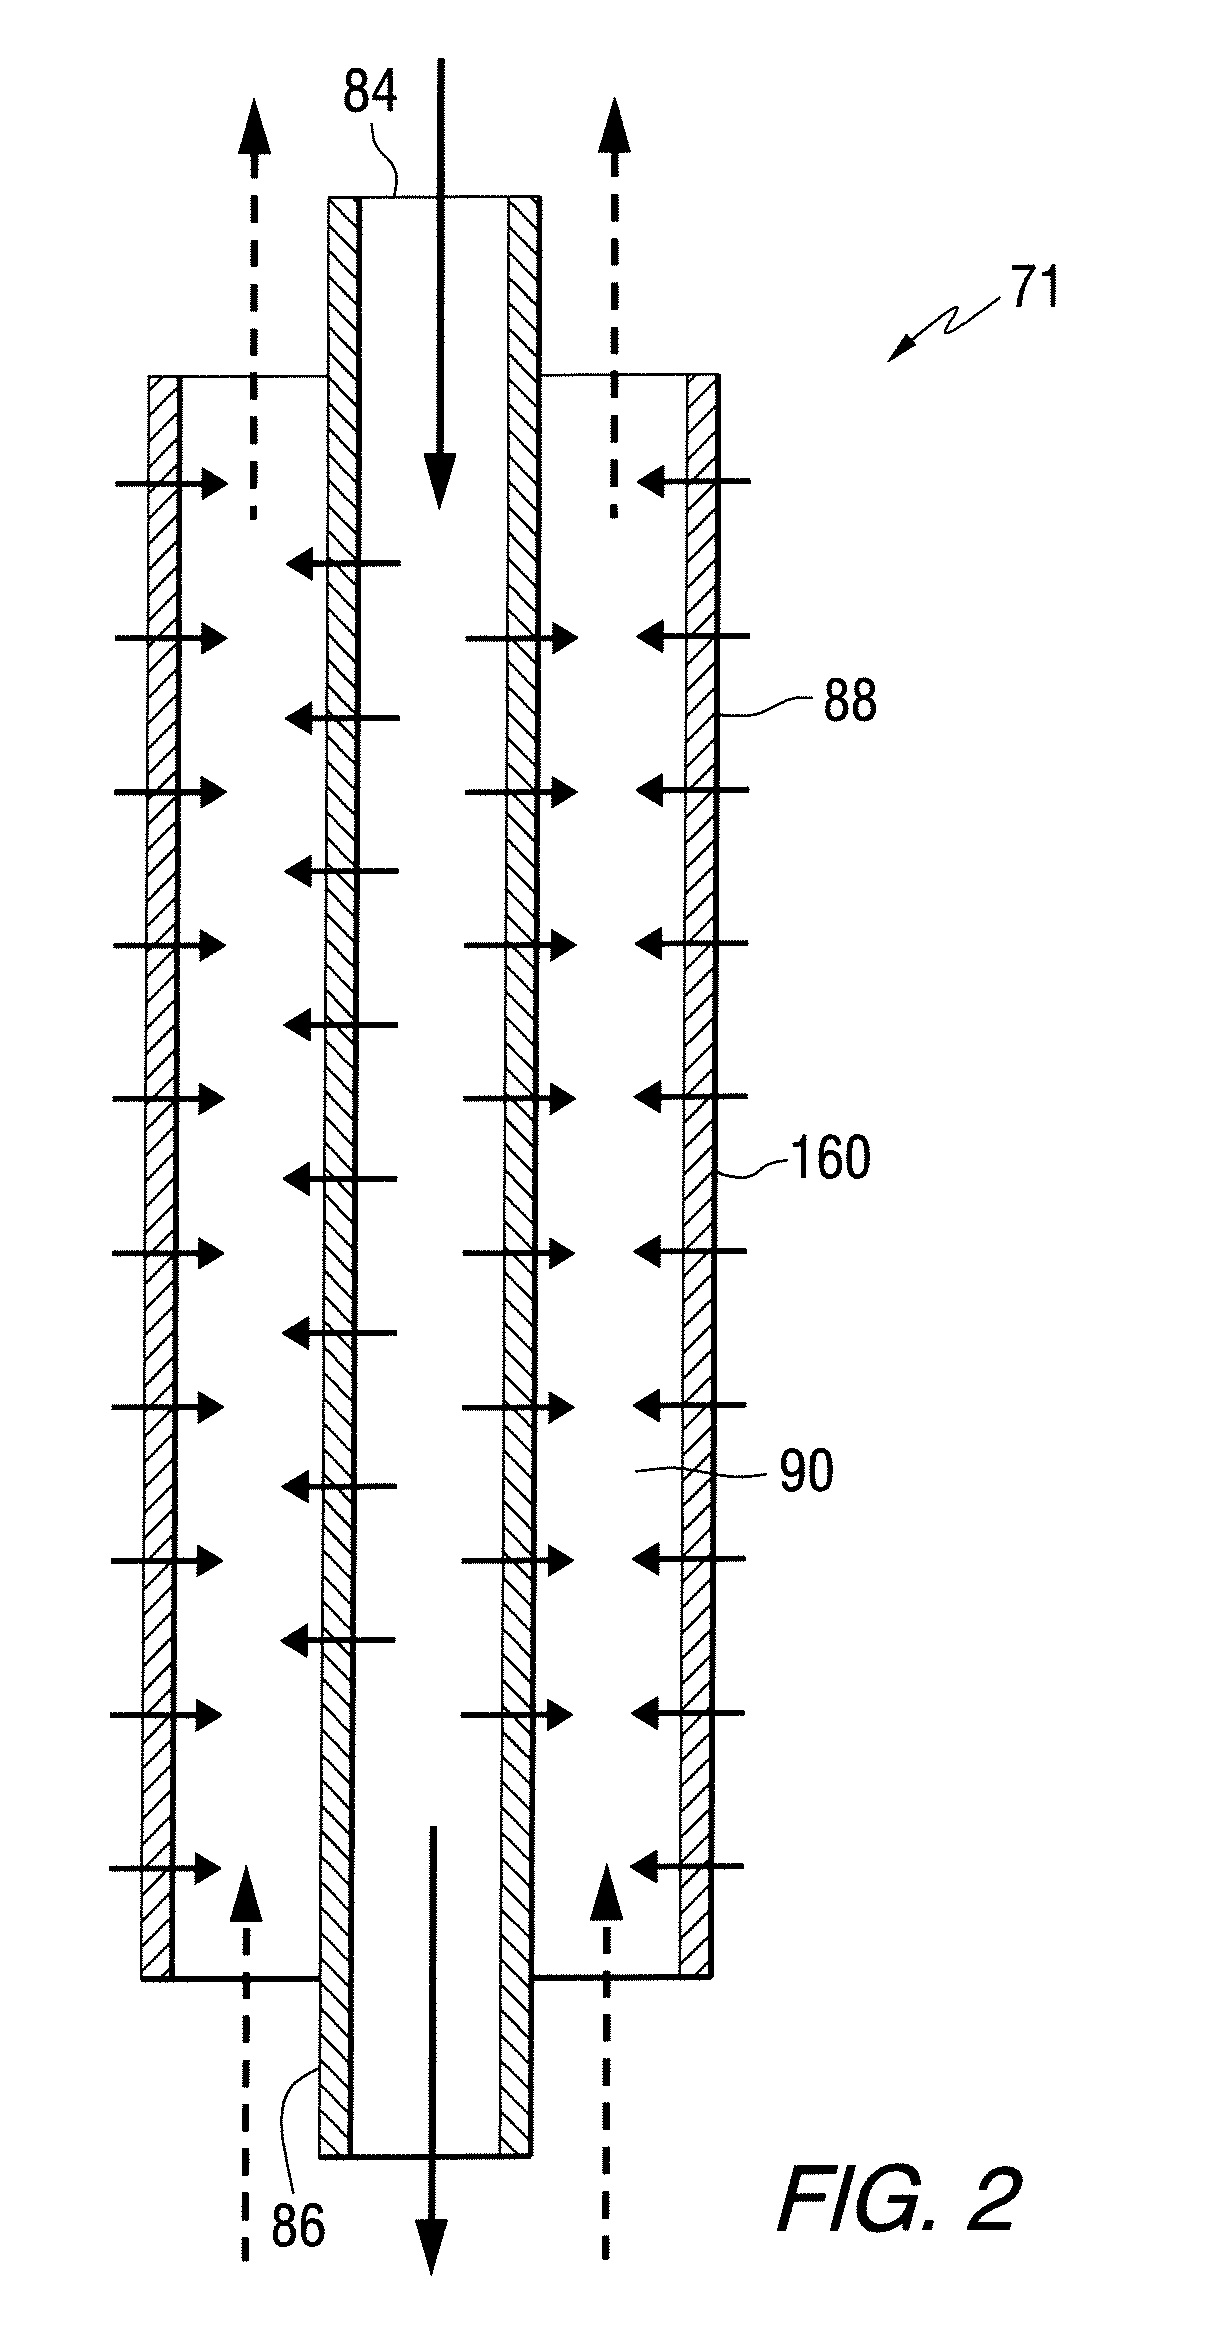 Marine fuel system with an ullage control device